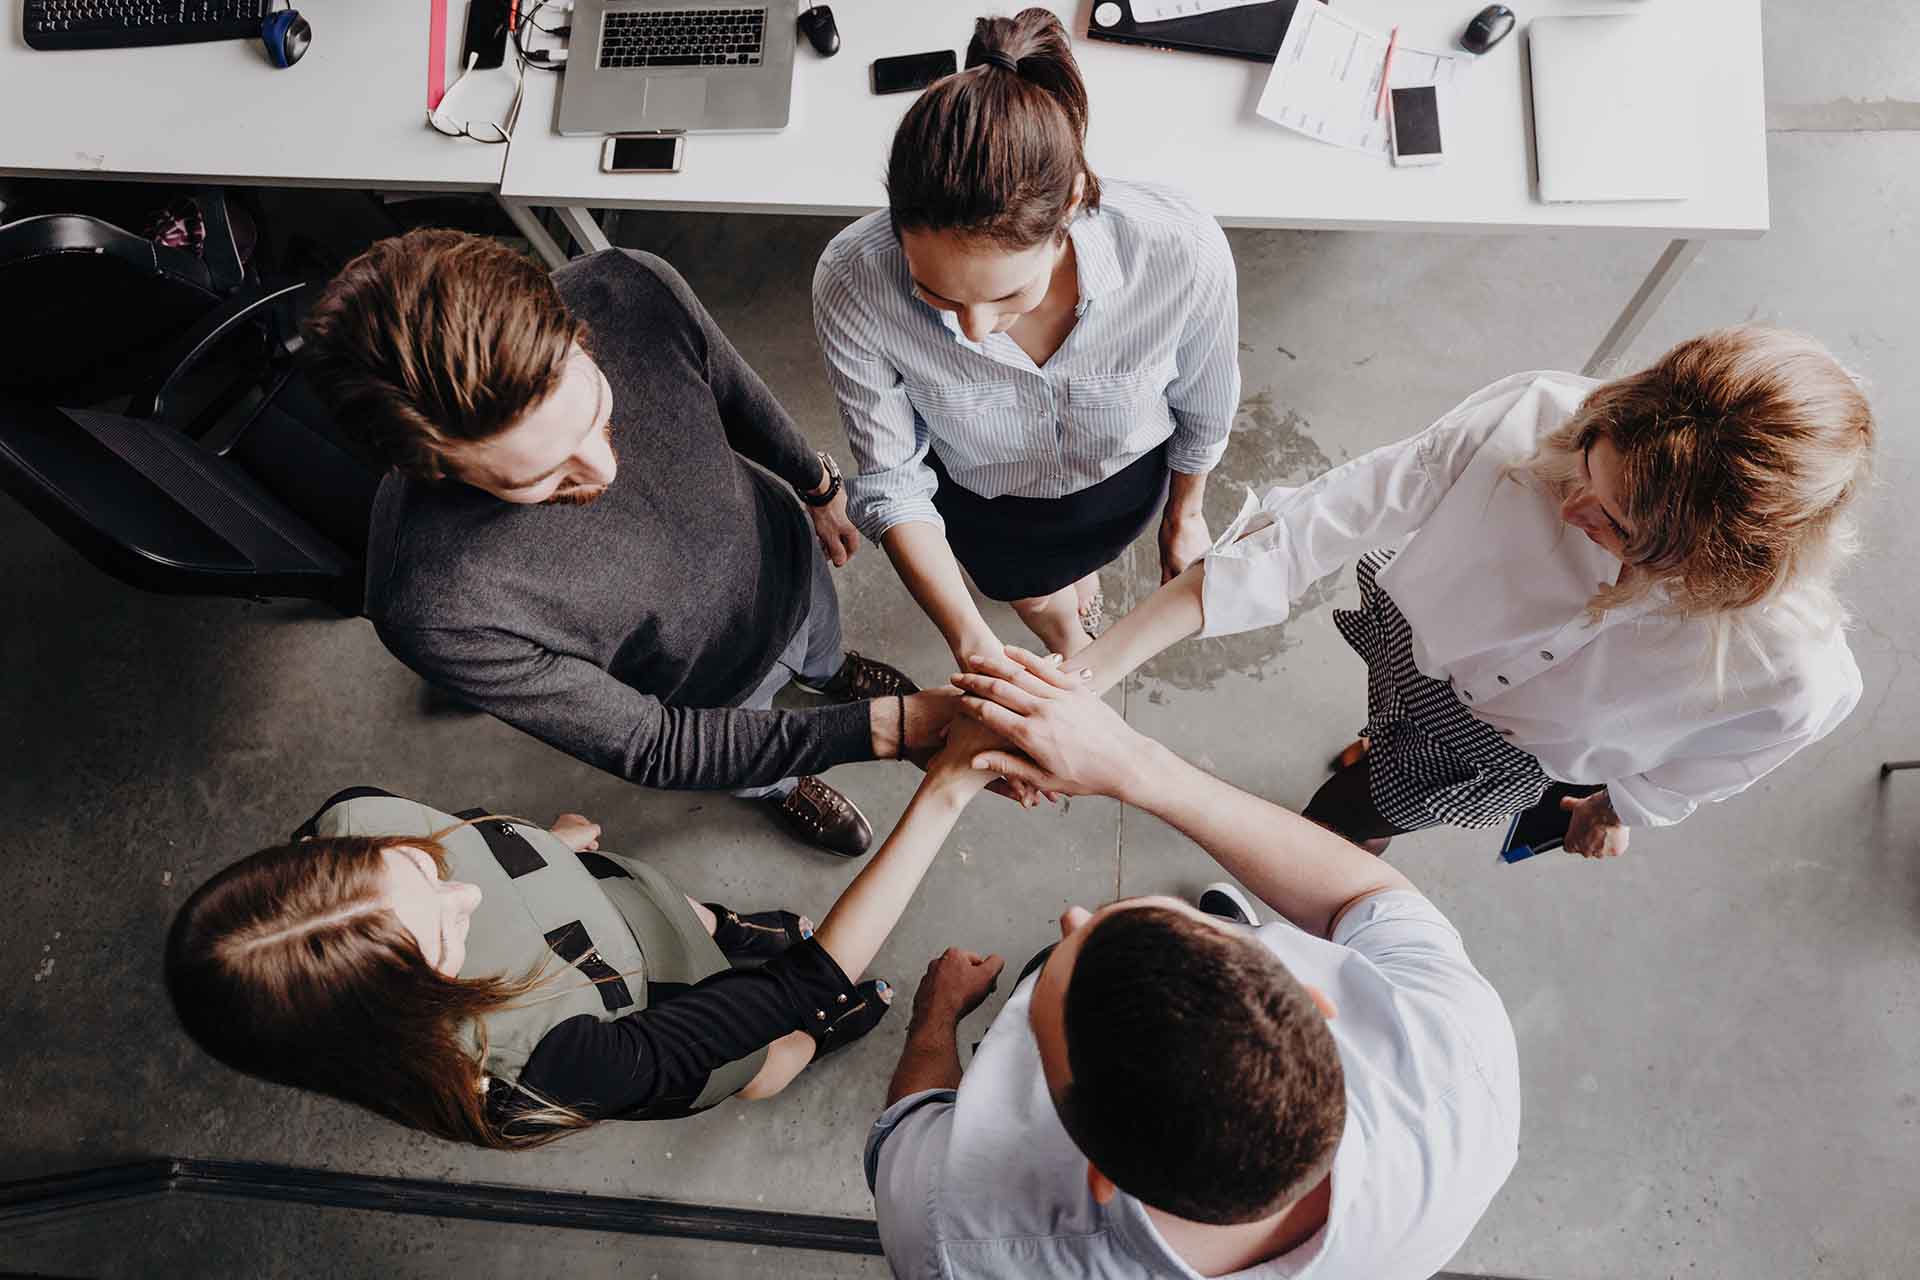 How Does Team Building Help The Workplace?